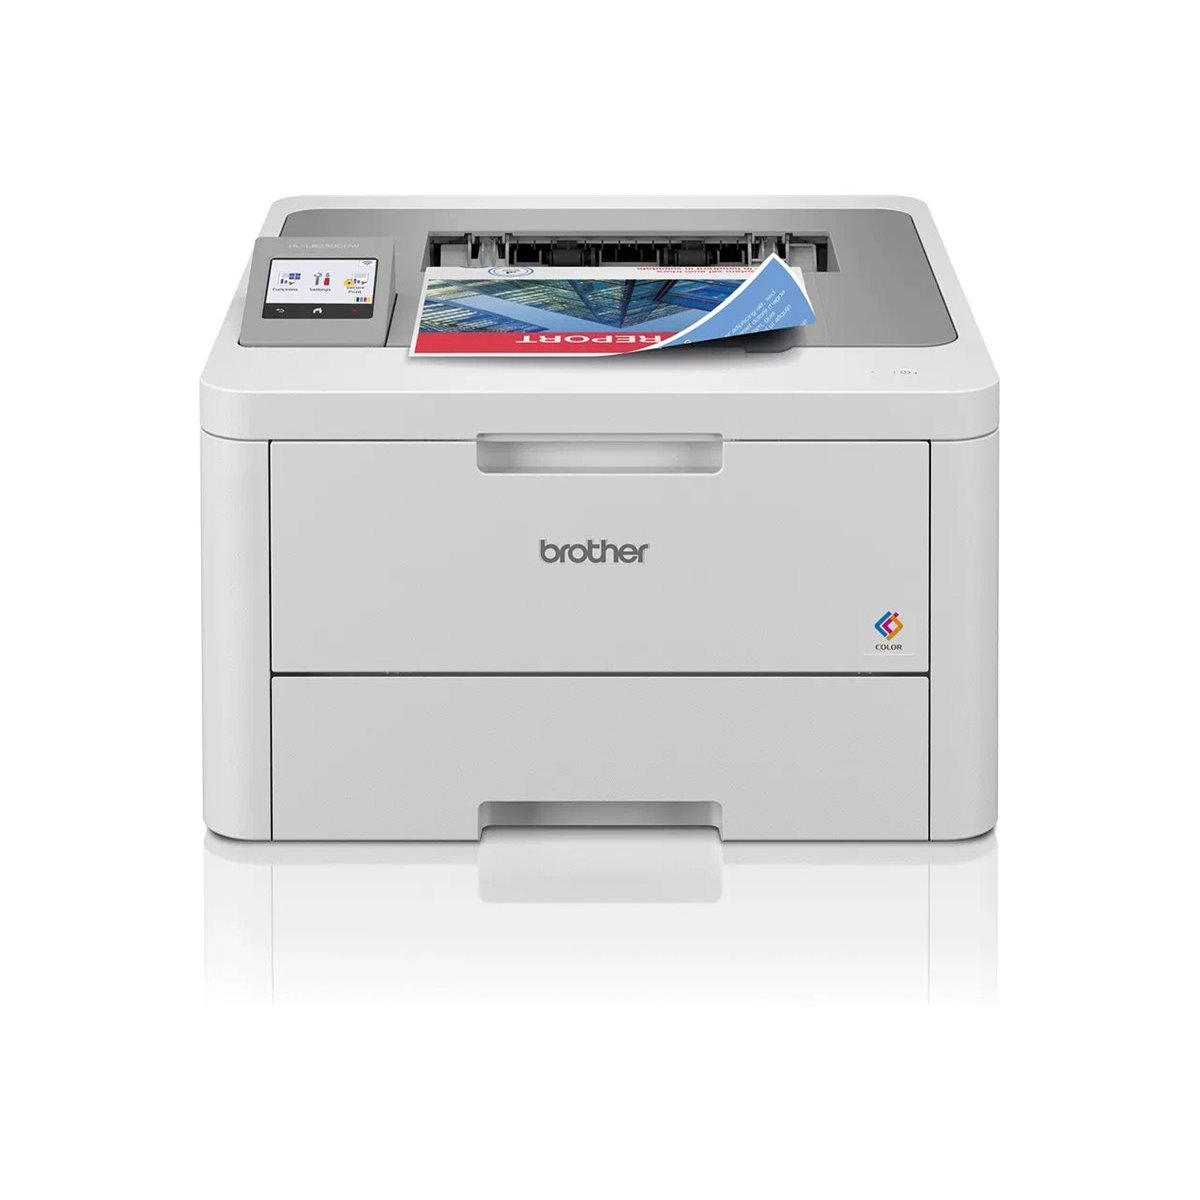 Brother Wireless LED printer